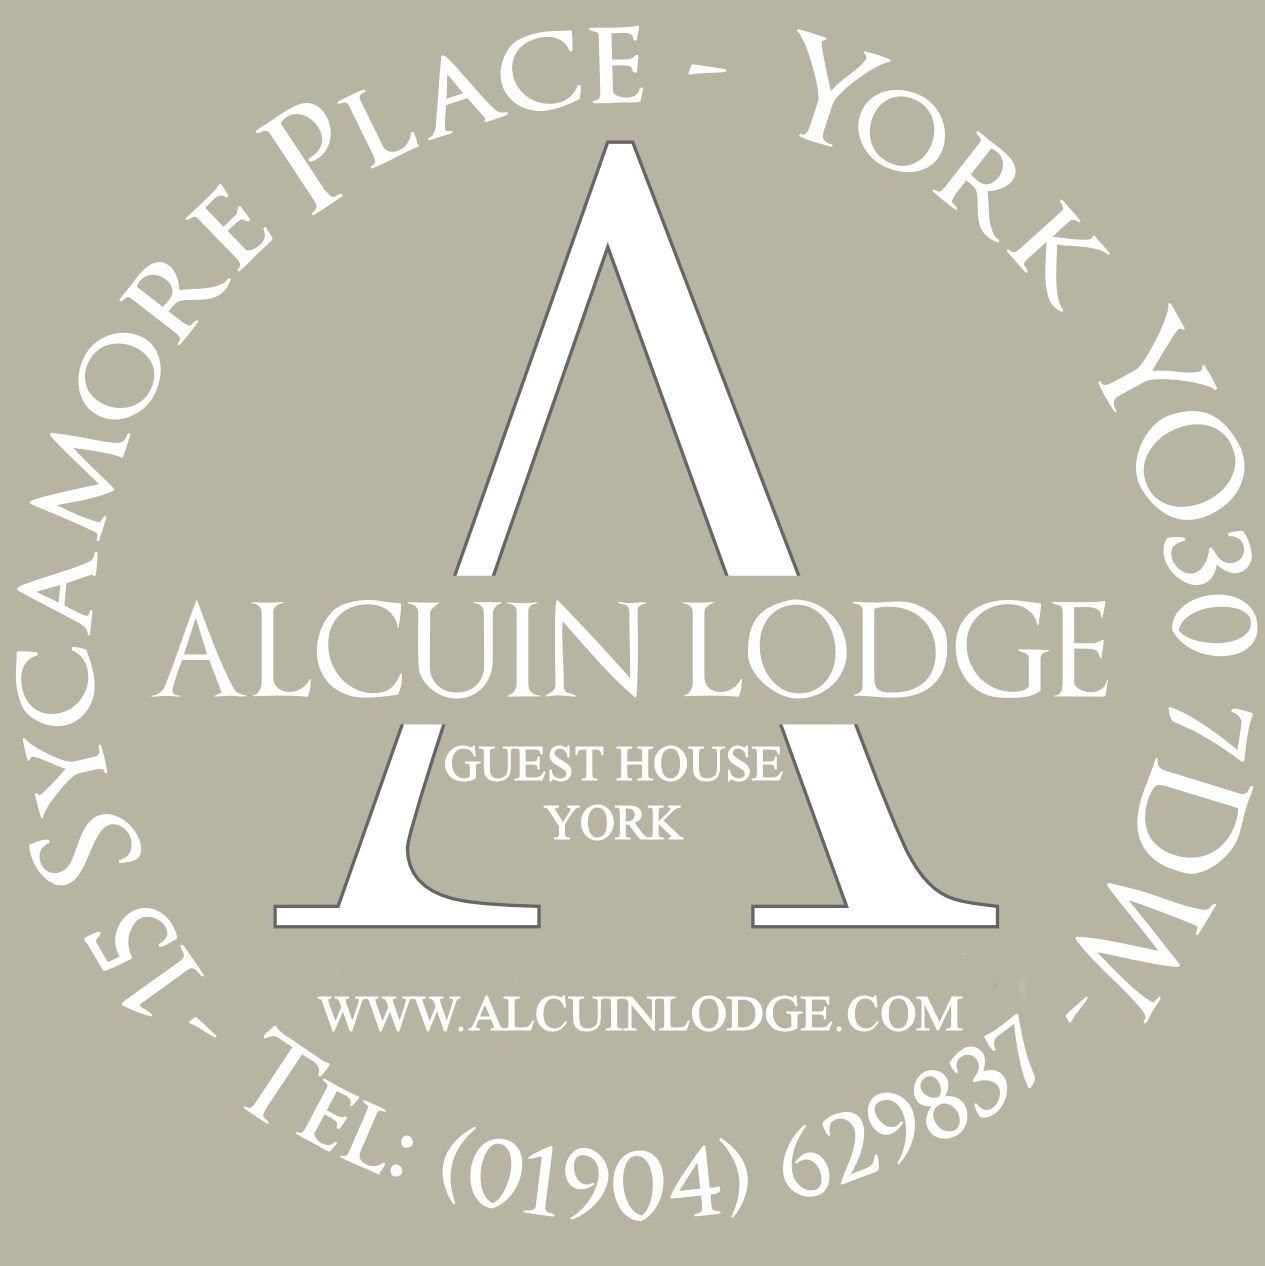 Alcuin Lodge Guest House Accommodation York.  
Listed in Top 25 UK B&Bs (TripAdvisor) 